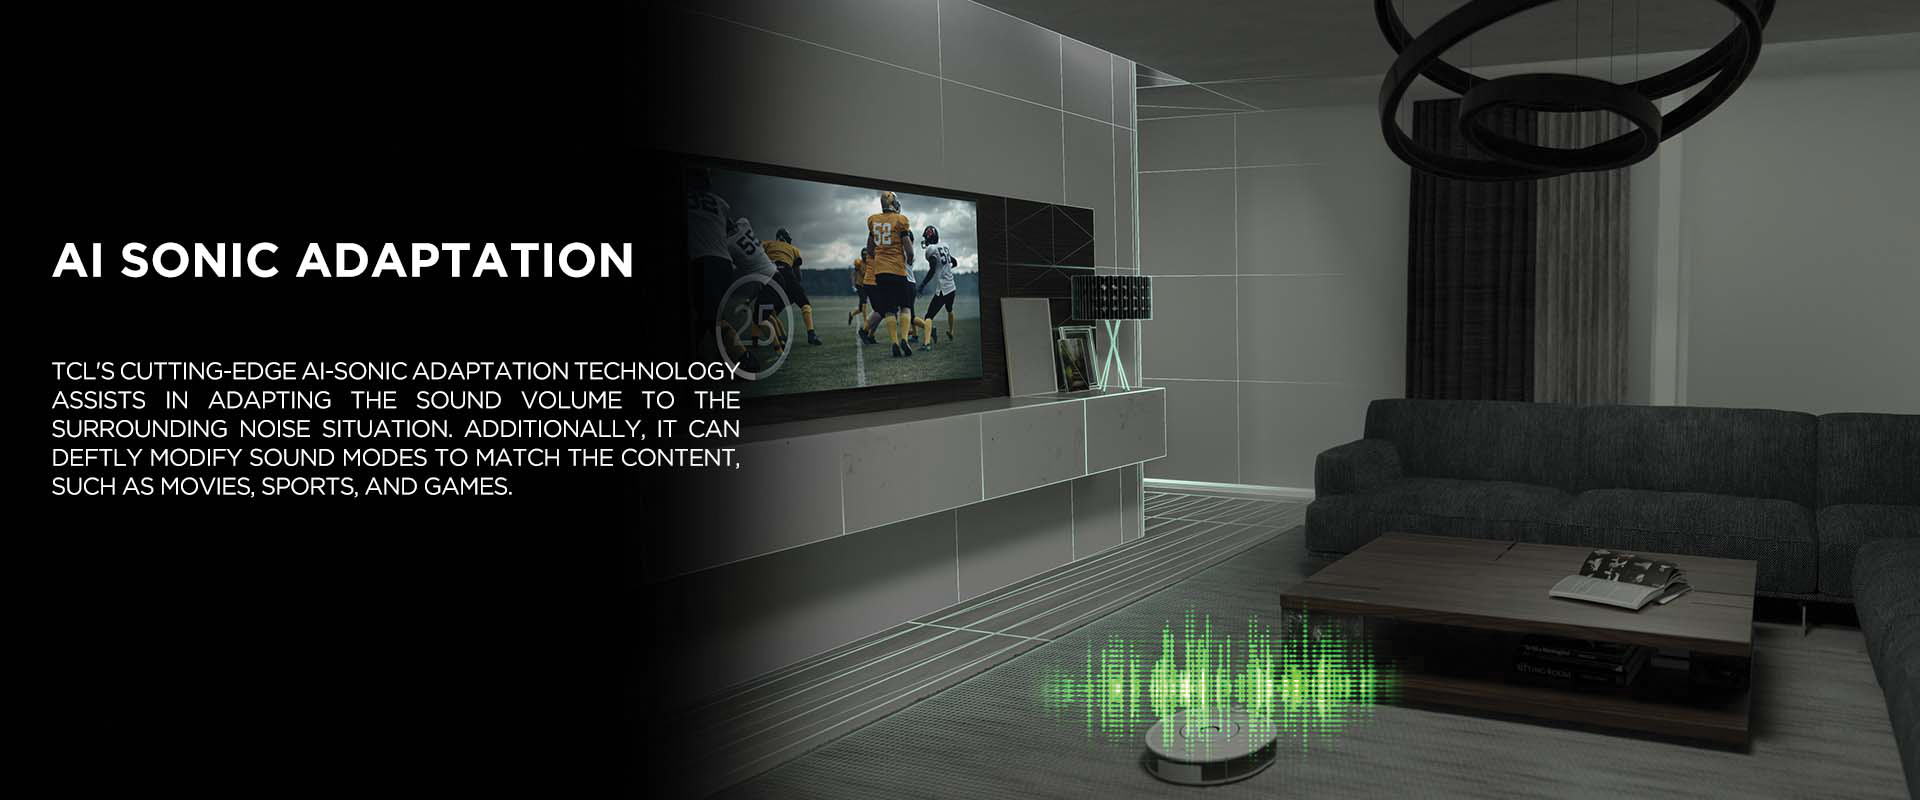 AI SONIC ADAPTATION - TCL's cutting-edge Ai-Sonic Adaptation technology assists in adapting the sound volume to the surrounding noise situation. Additionally, it can deftly modify sound modes to match the content, such as movies, sports, and games.